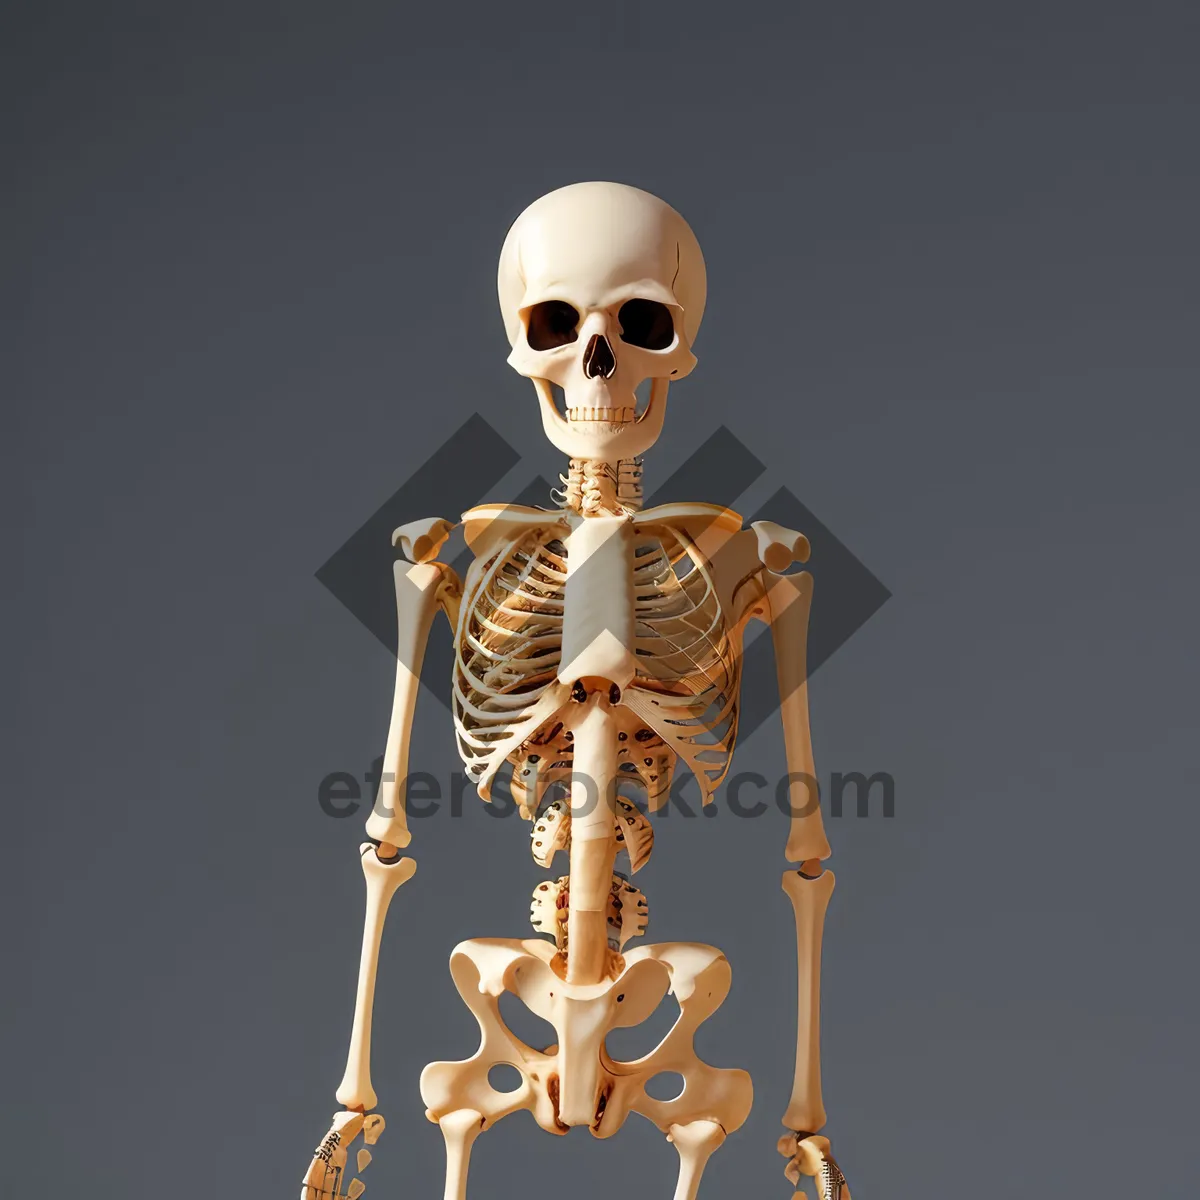 Picture of 3D Human Skeleton Figure - Anatomical X-Ray Pose"
Note: It is important to note that this descriptive name is solely based on the provided tags and does not include additional information or context.